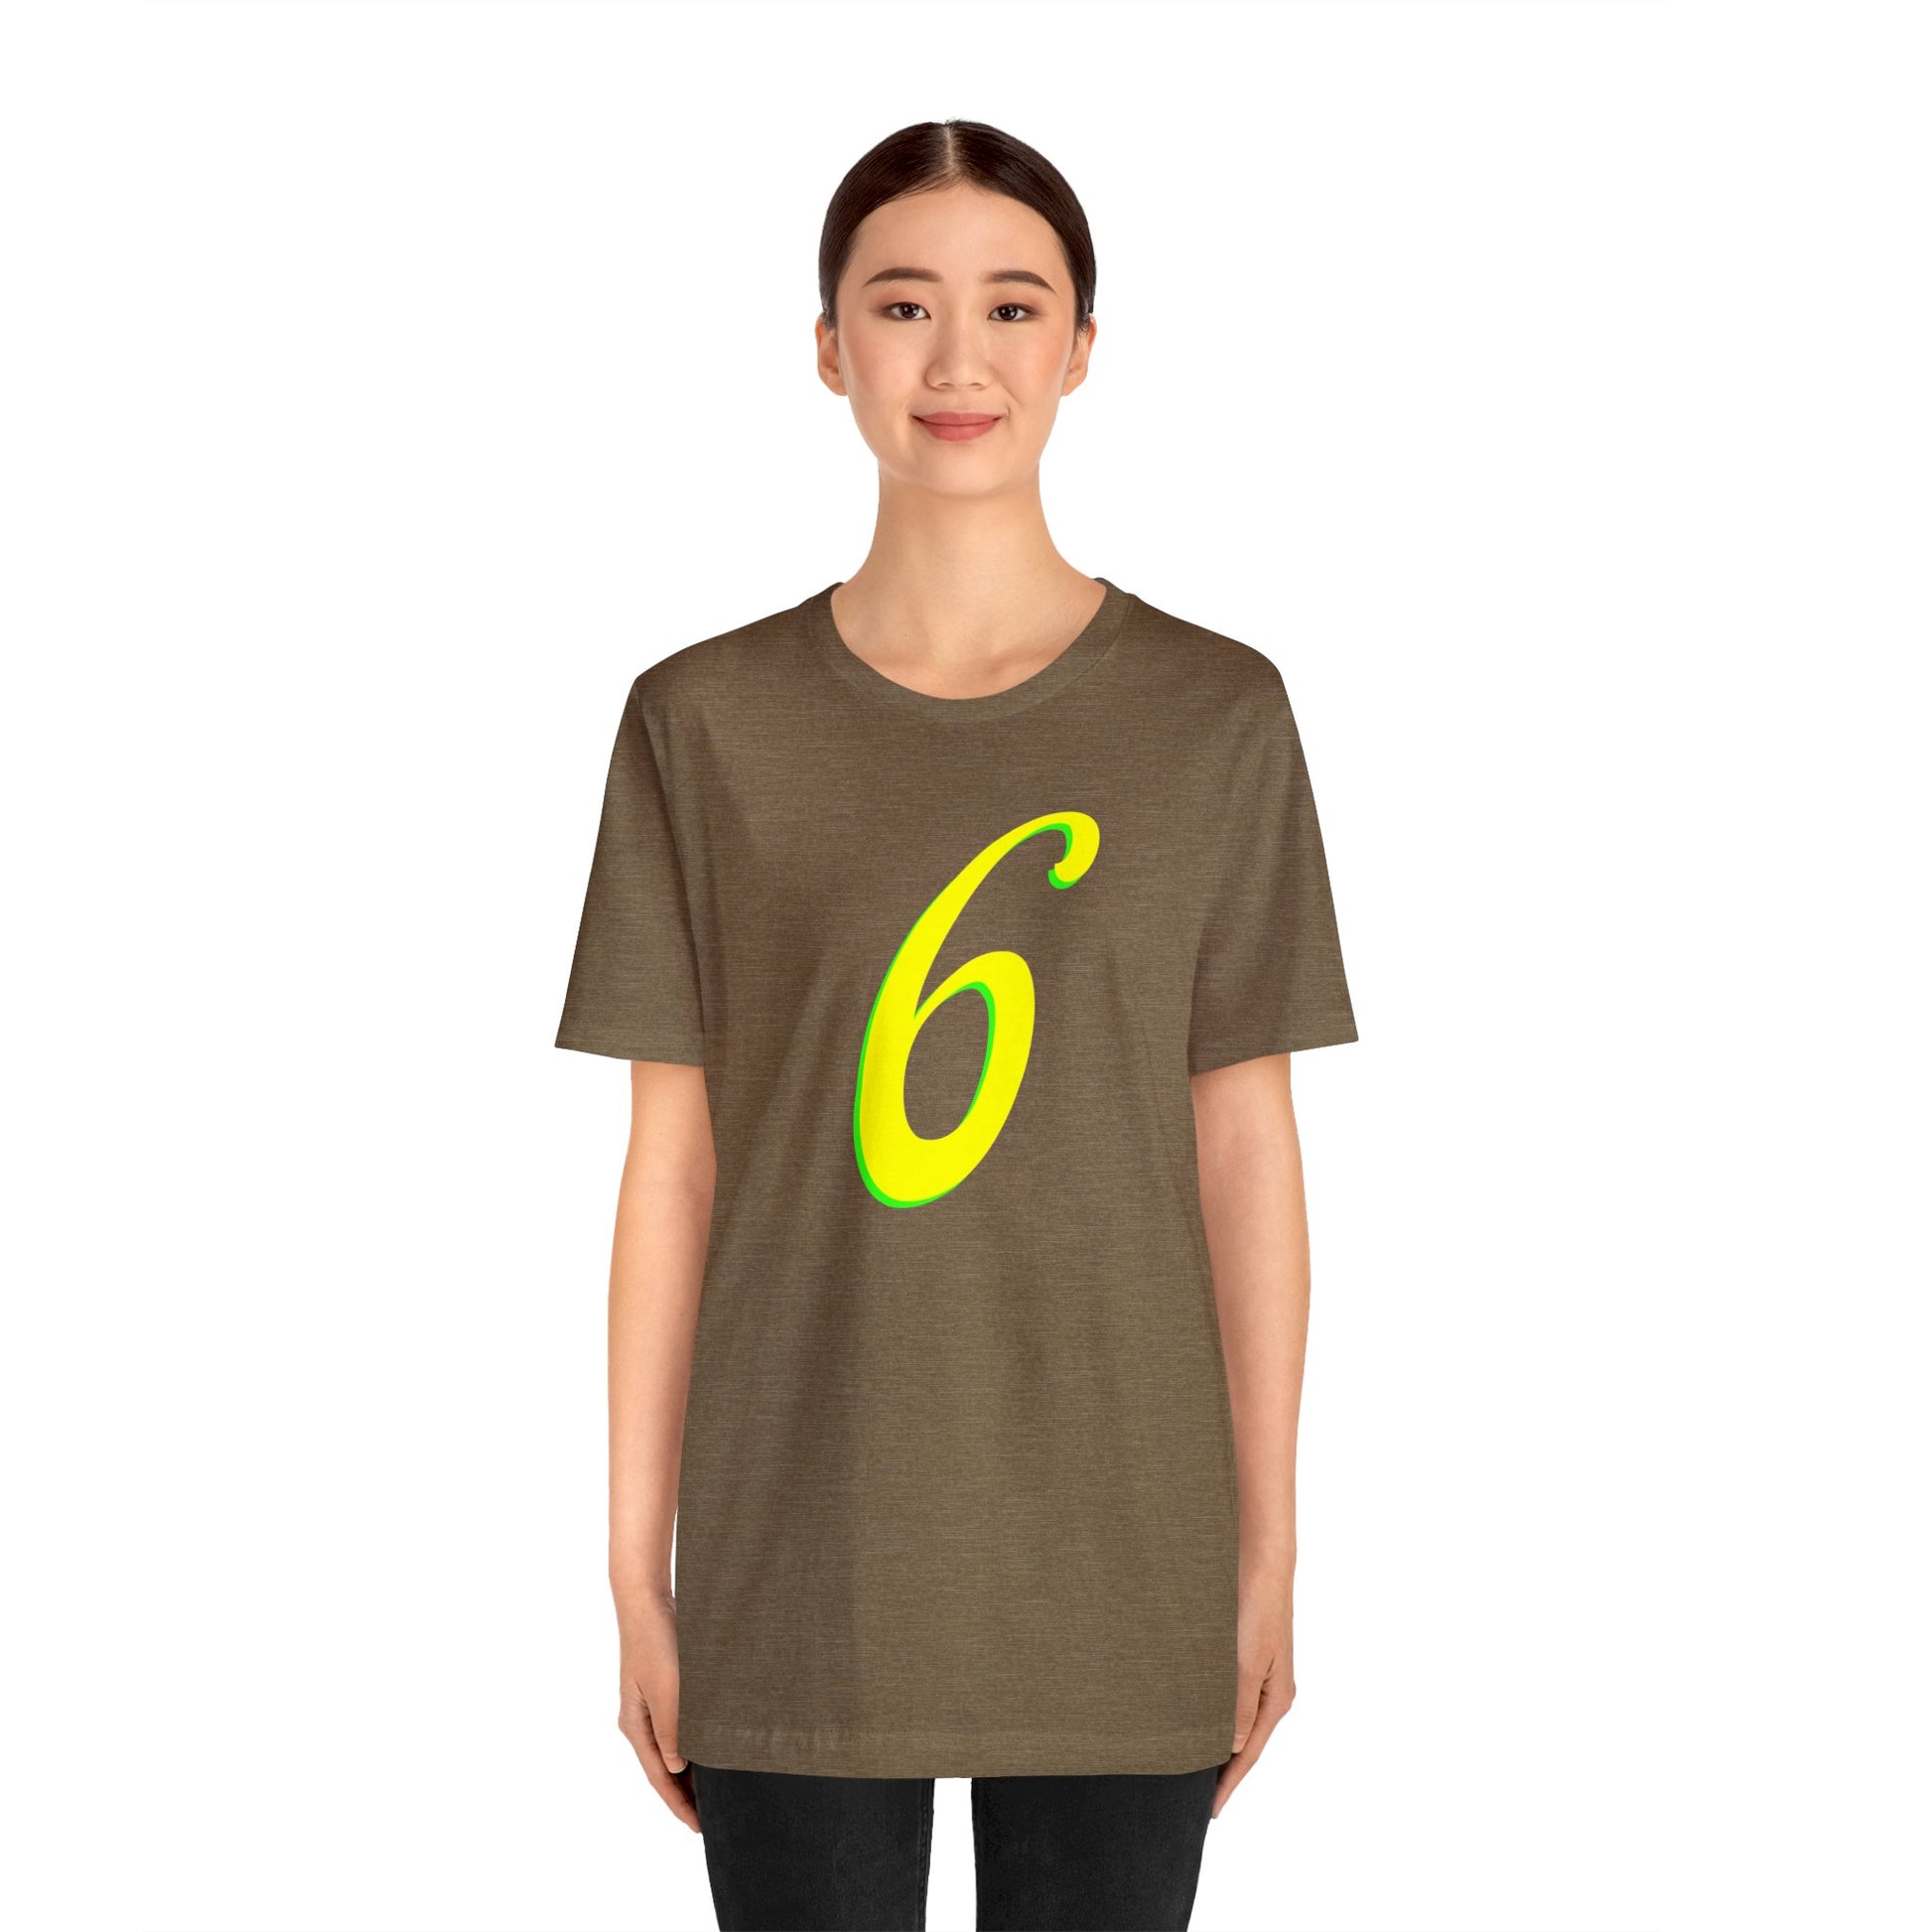 Number 6 Design - Soft Cotton Tee for birthdays and celebrations, Gift for friends and family, Multiple Options by clothezy.com in Asphalt Size Medium - Buy Now